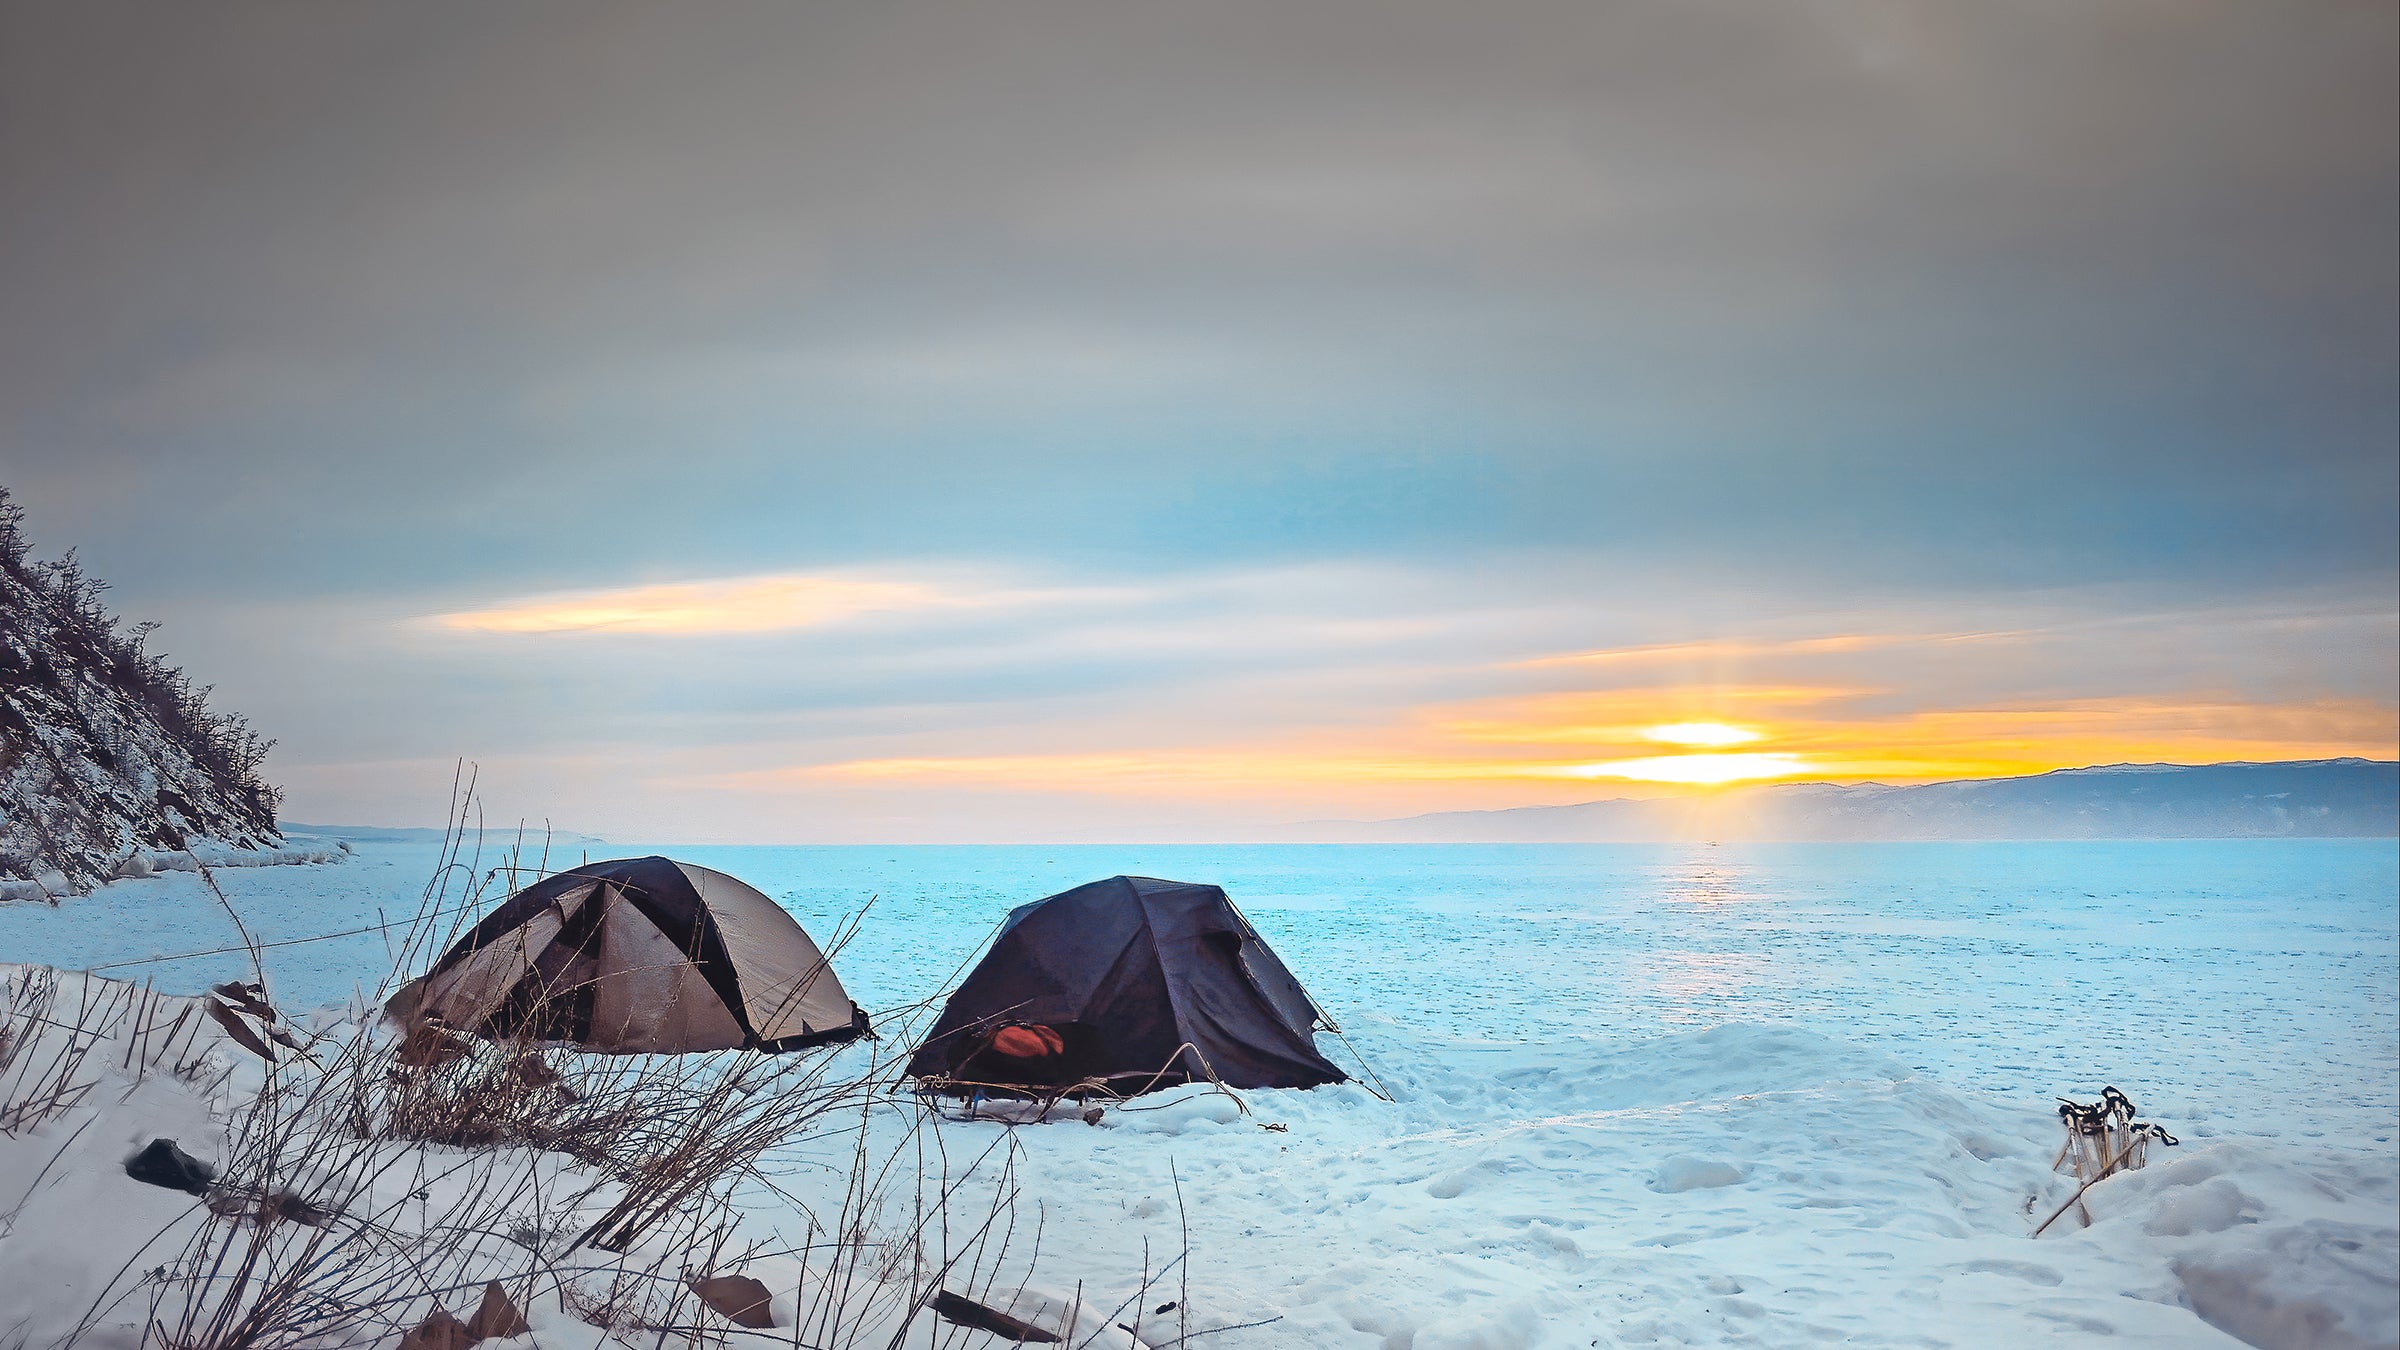 8 Indispensable Winter Camping Gear Items that Turn Freezing into Fun